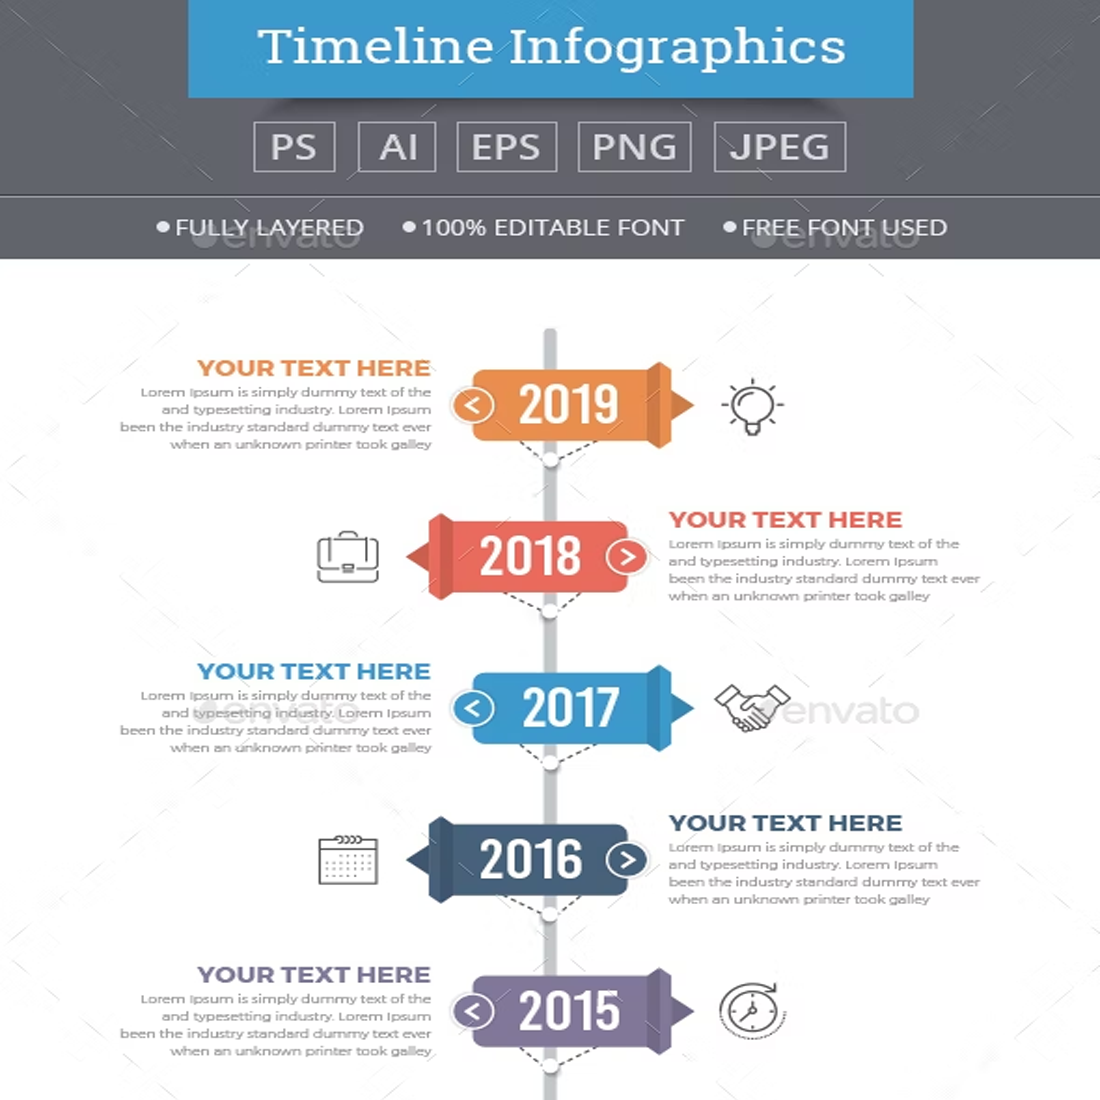 Images preview vertical timeline infographics.